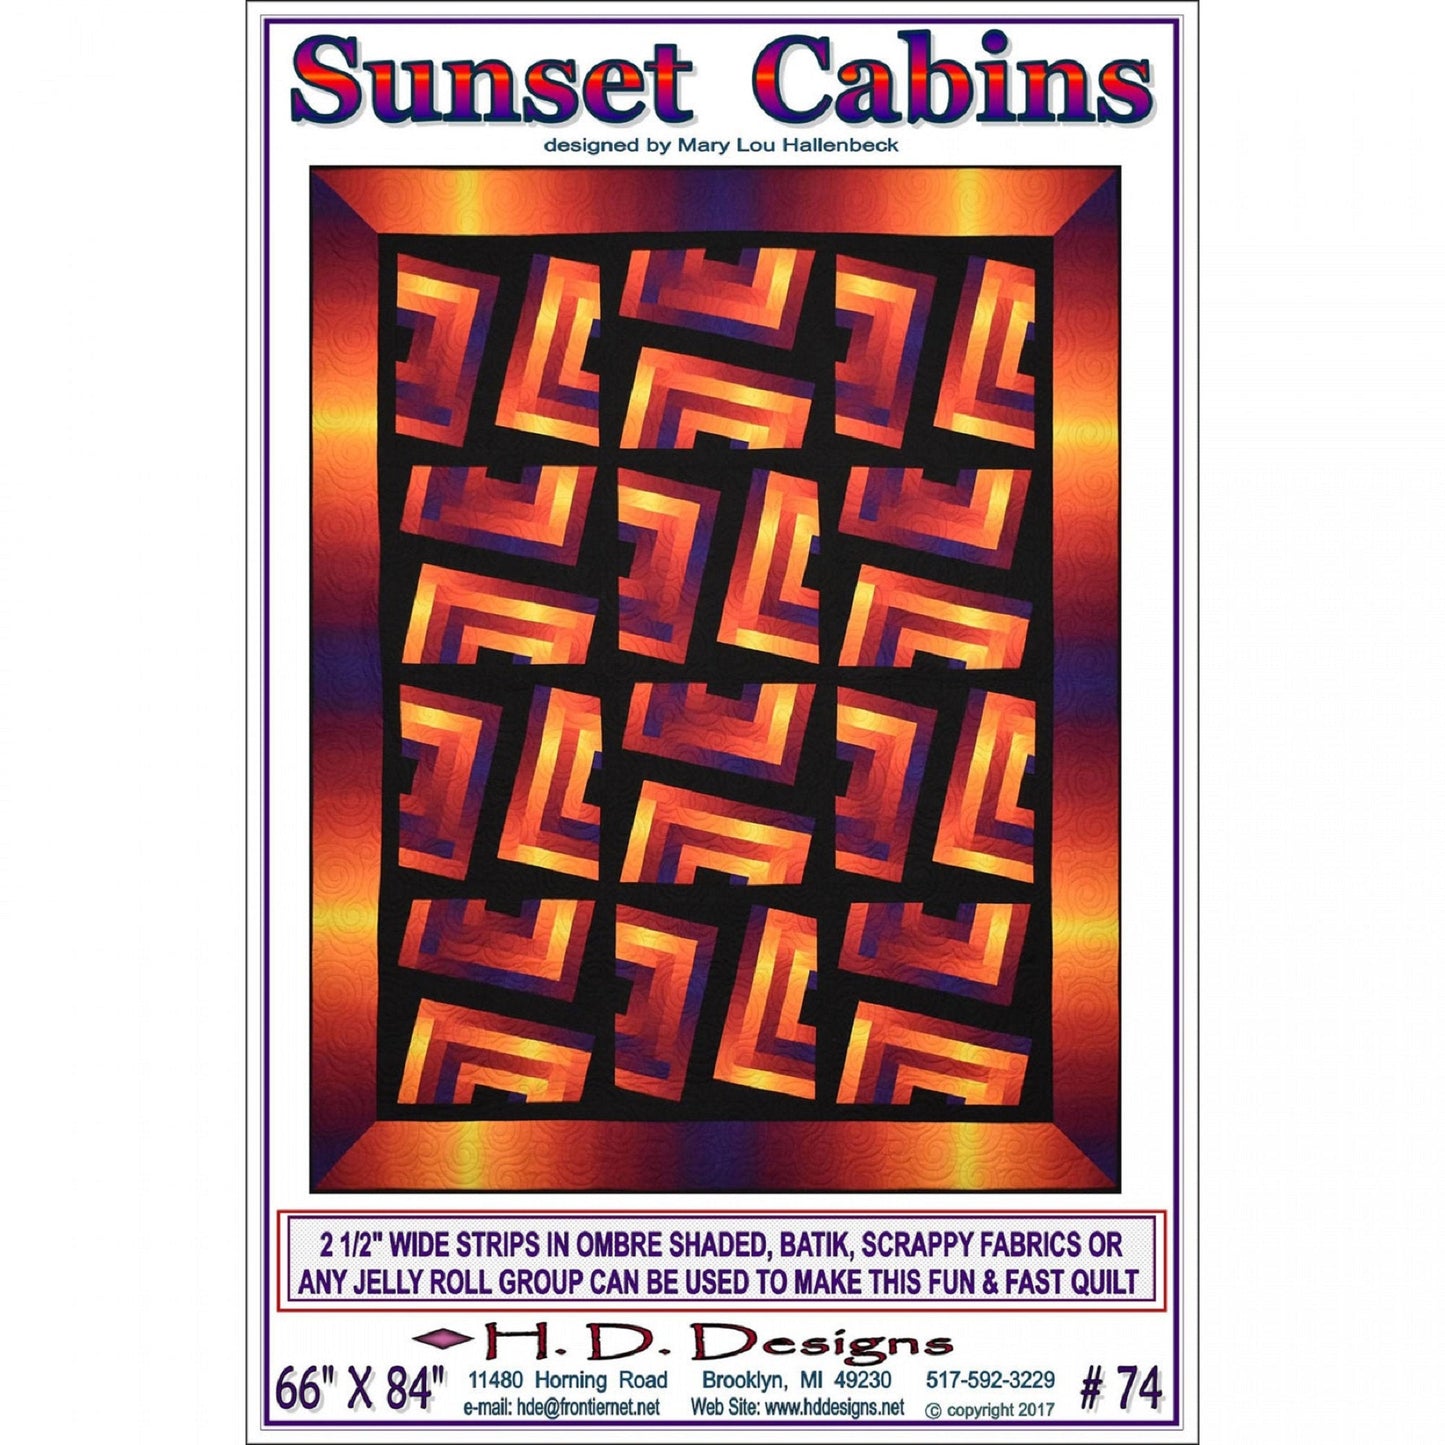 Sunset Cabins Pattern by H.D. Designs